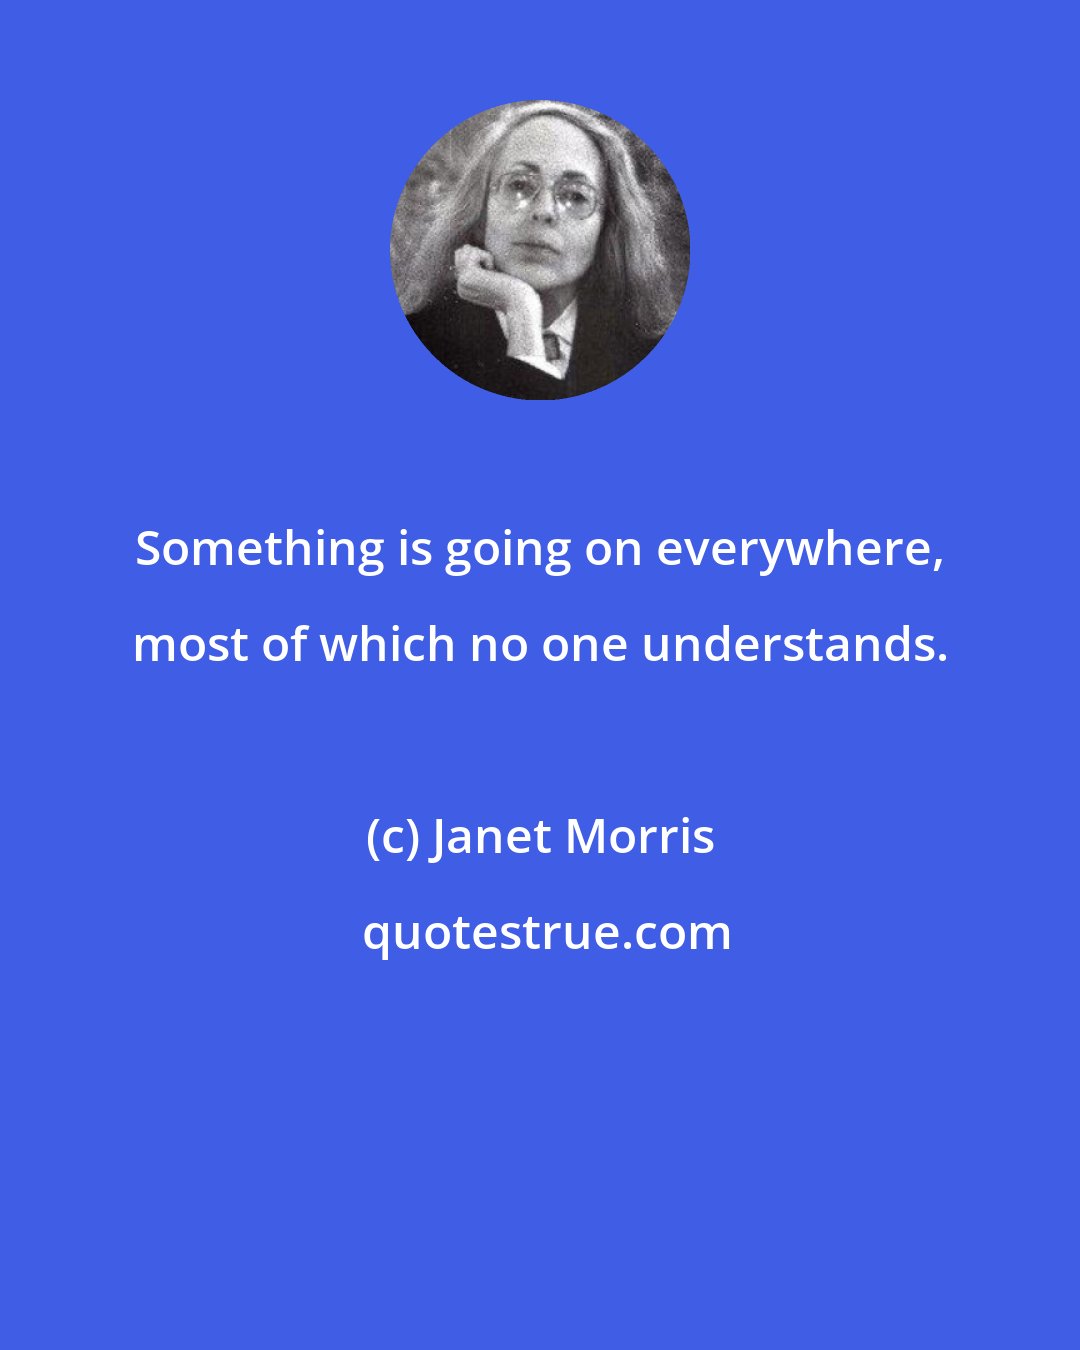 Janet Morris: Something is going on everywhere, most of which no one understands.